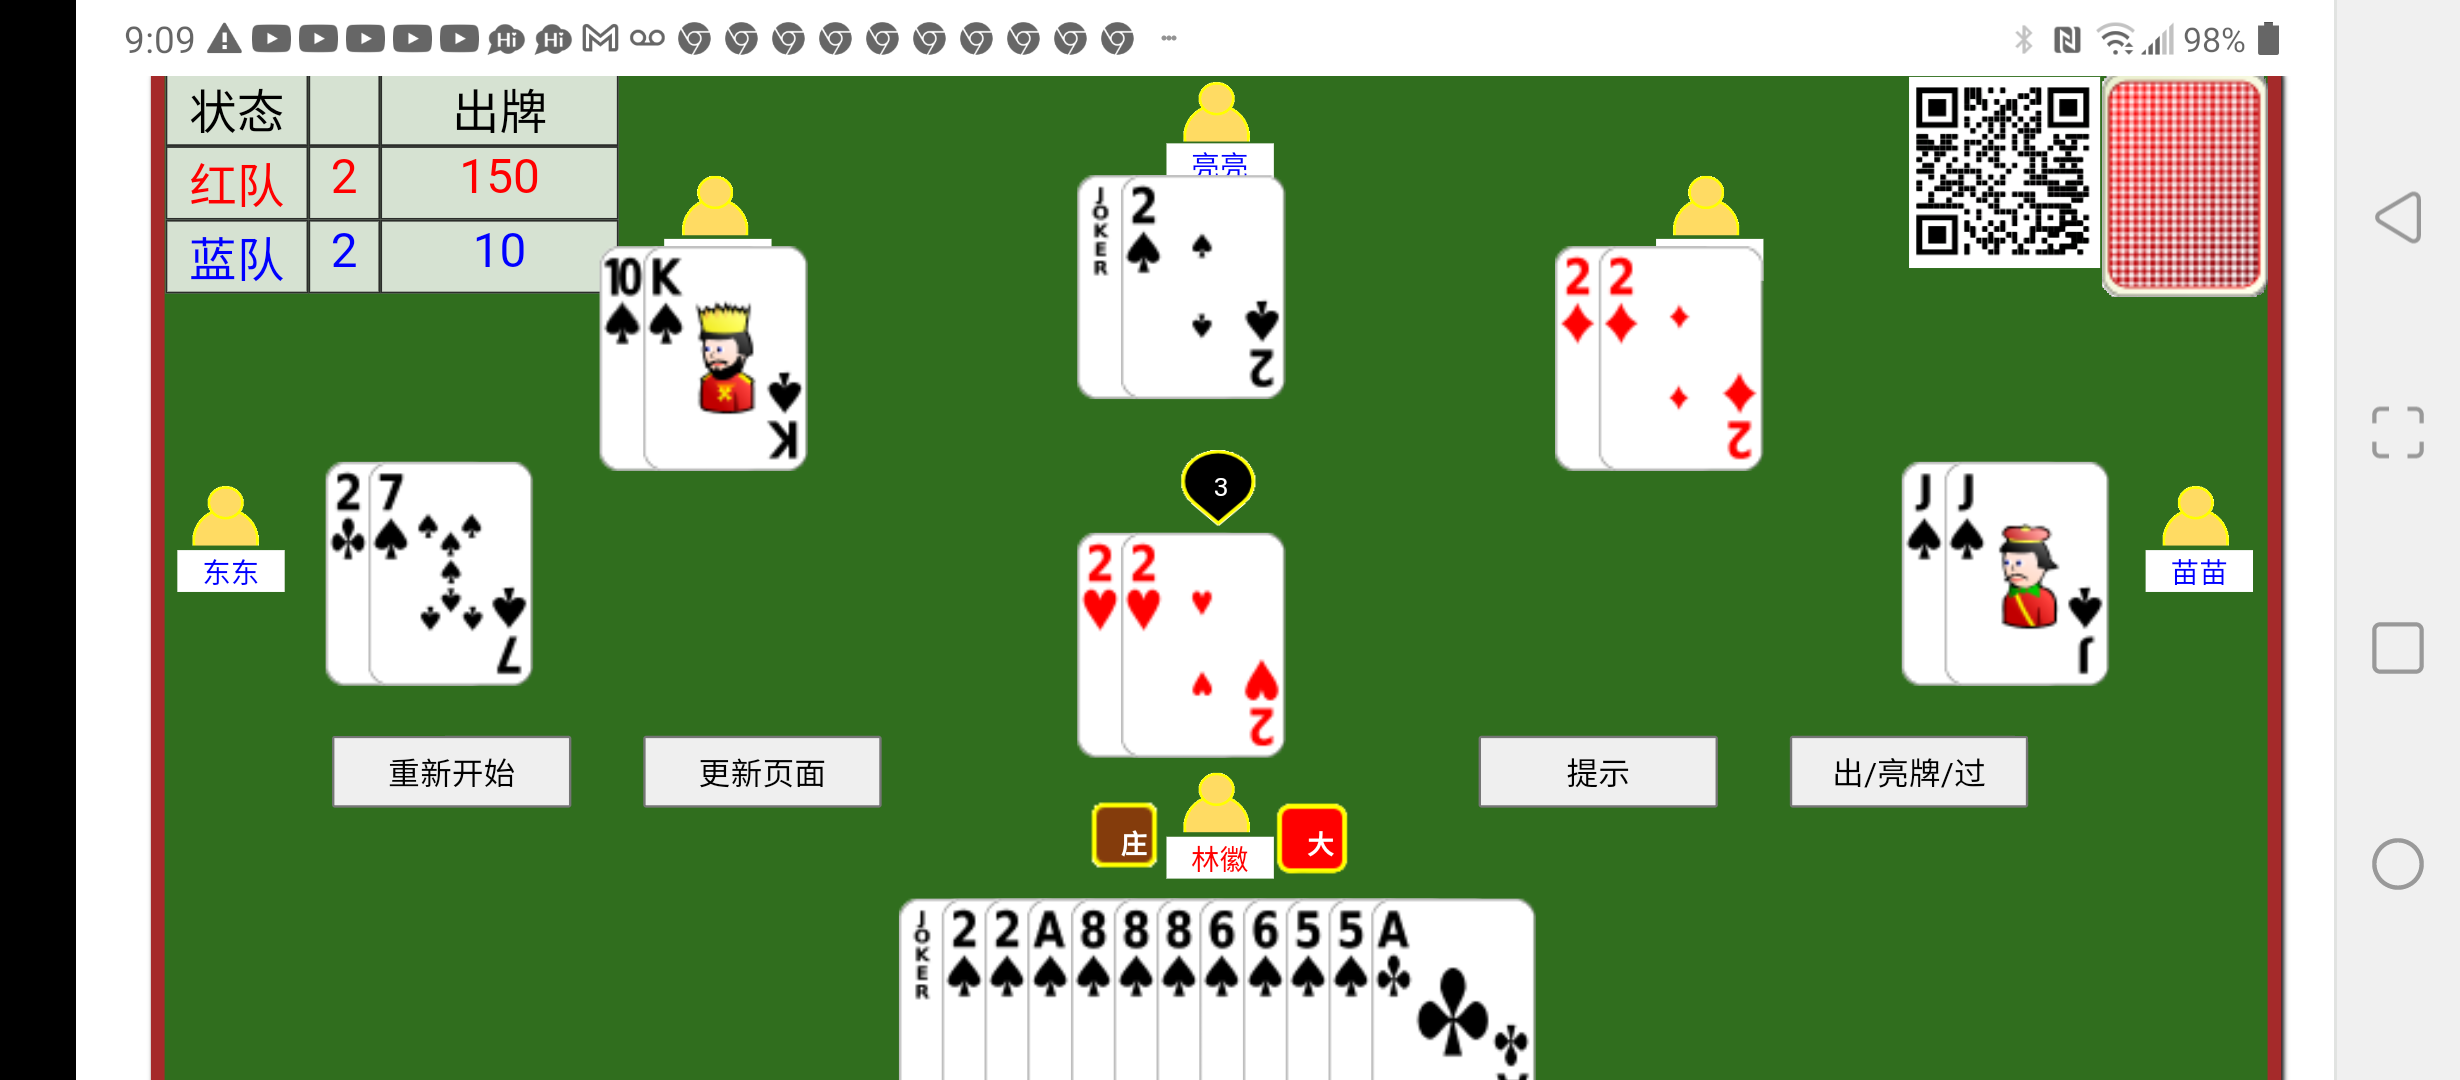 html5 tractor card game Screenshot_20220116-090929.png